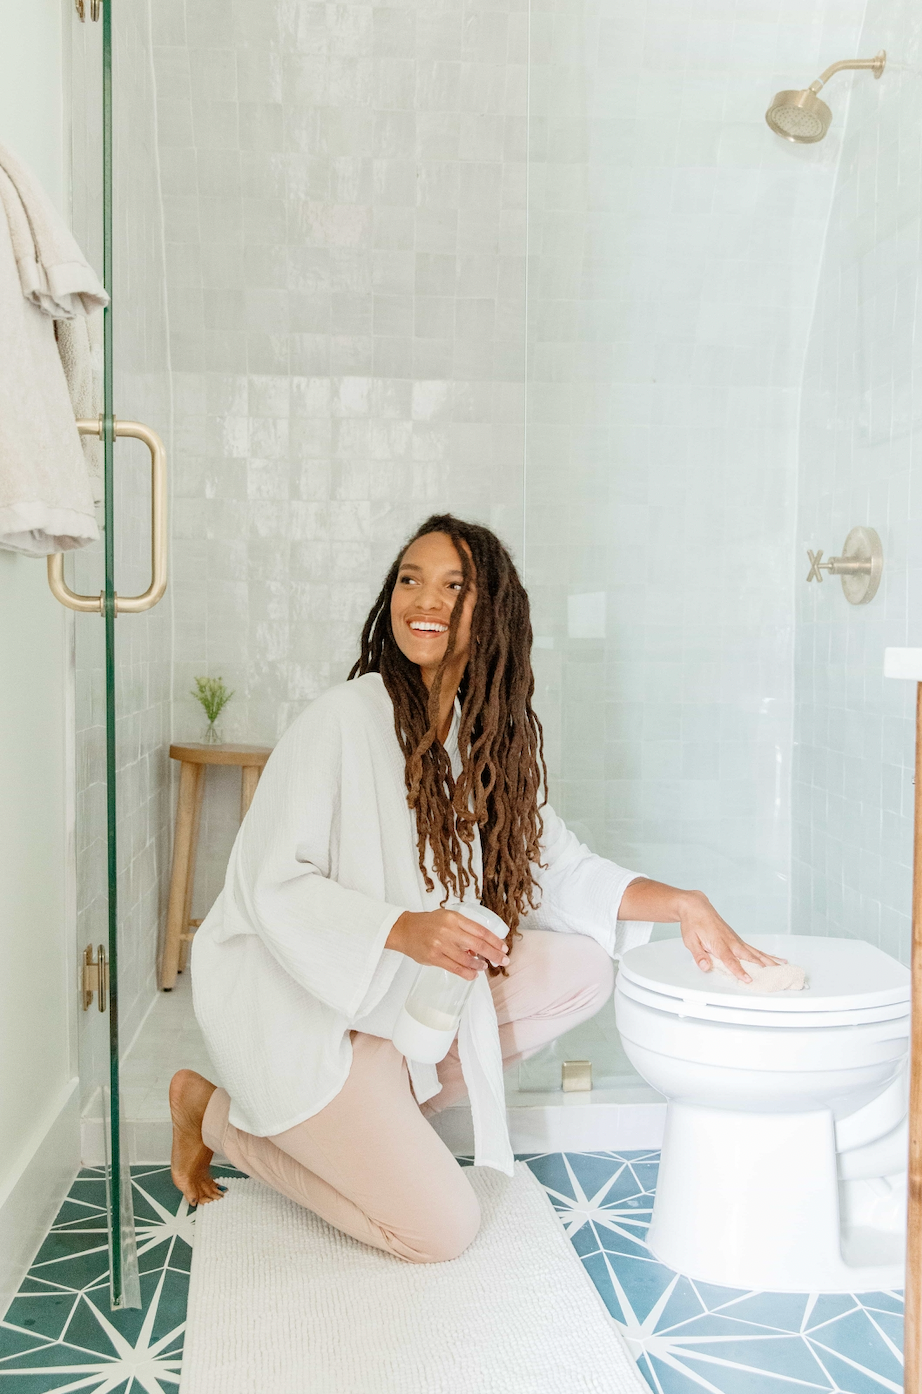 The Best Natural & Non-Toxic Bathroom Cleaners - Umbel Organics